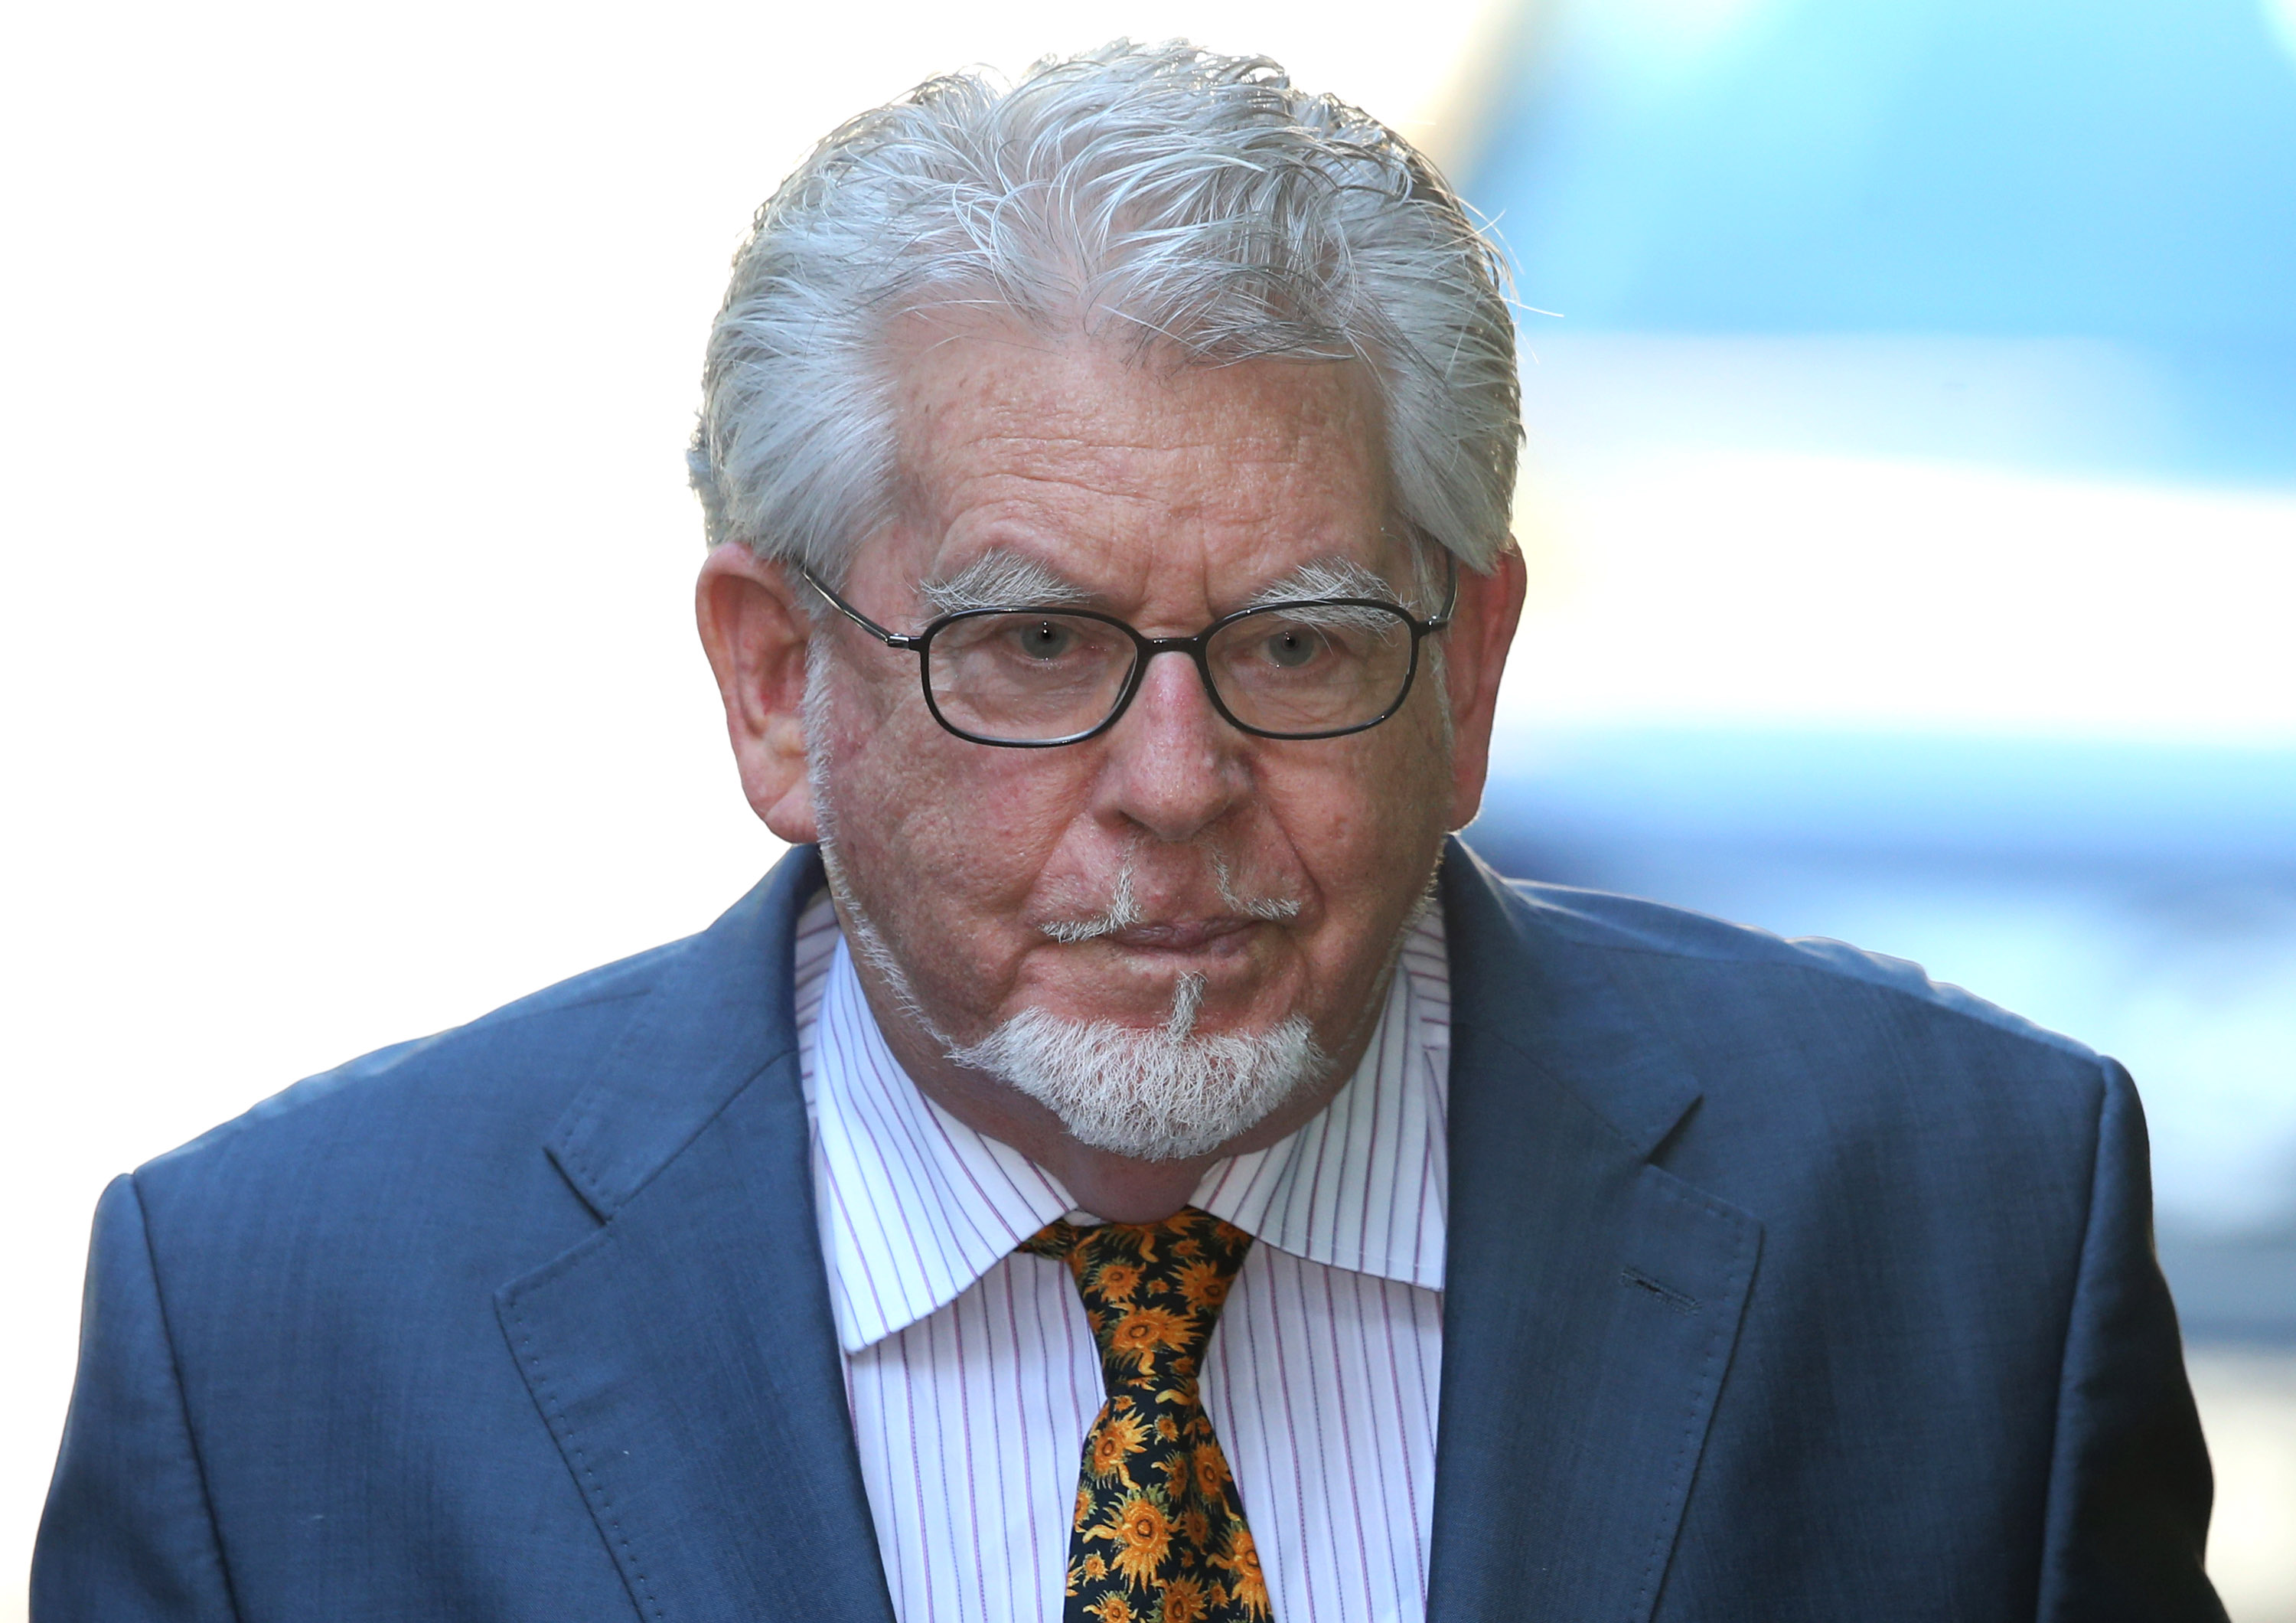 Artist and television personality Rolf Harris arrives at Southwark Crown Court in London on May 14, 2014 (Peter Macdiarmid—Getty Images)